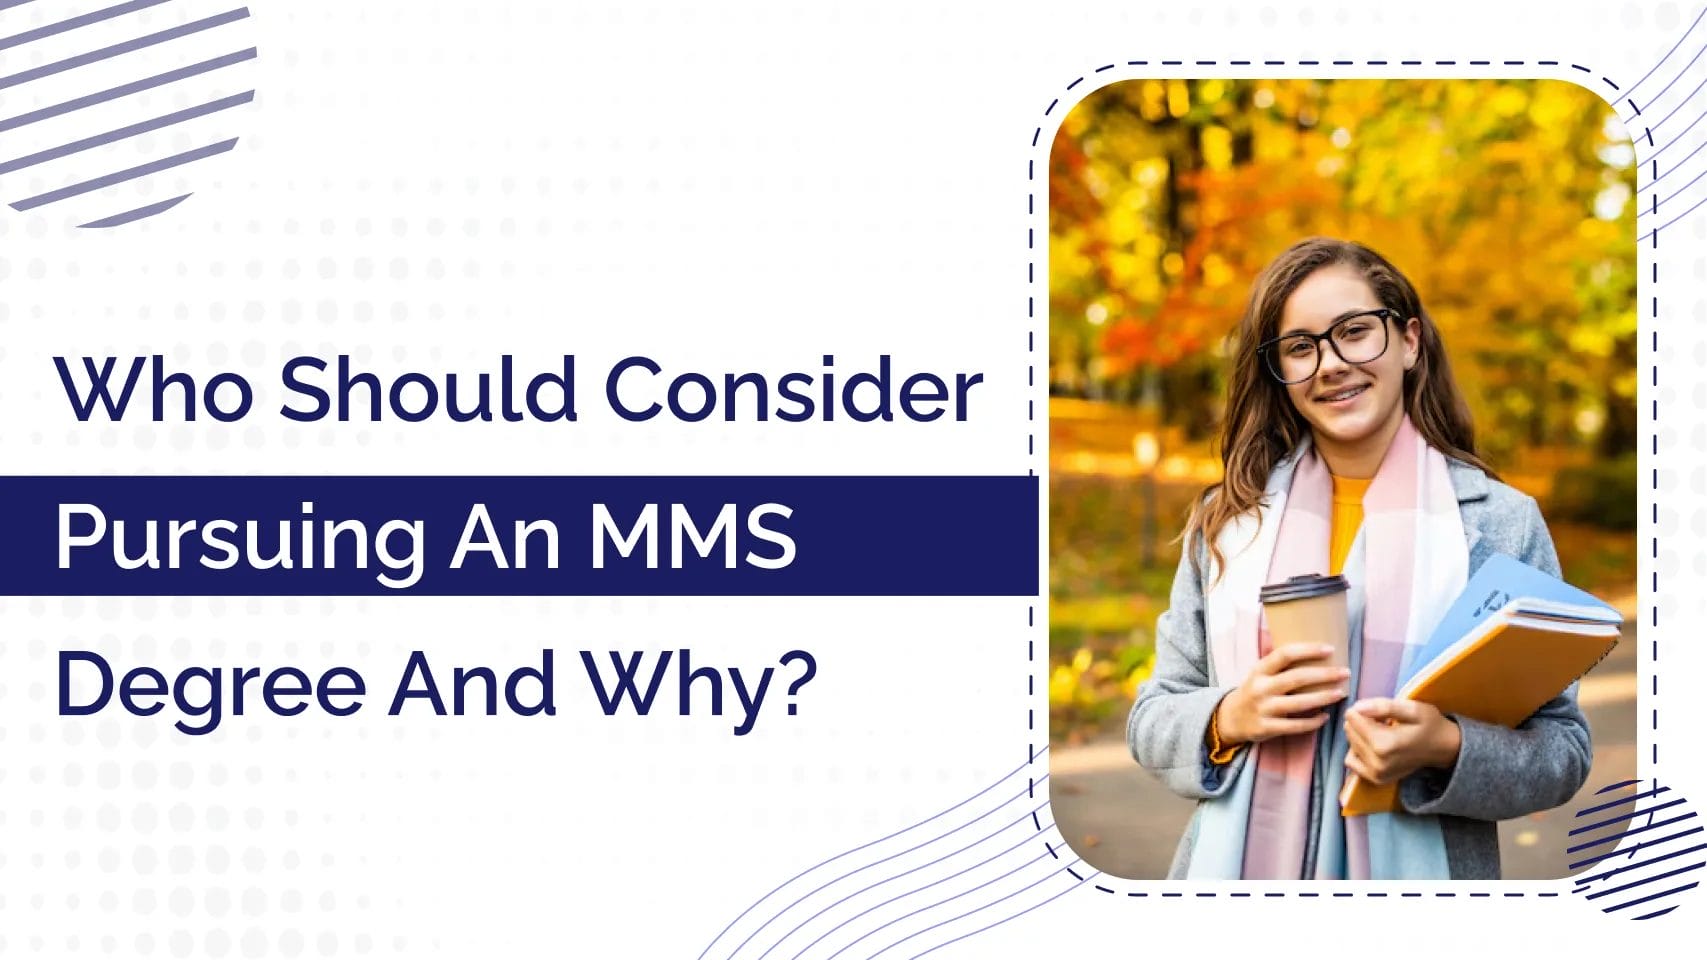 Who Should Consider Pursuing an MMS Degree, and Why?